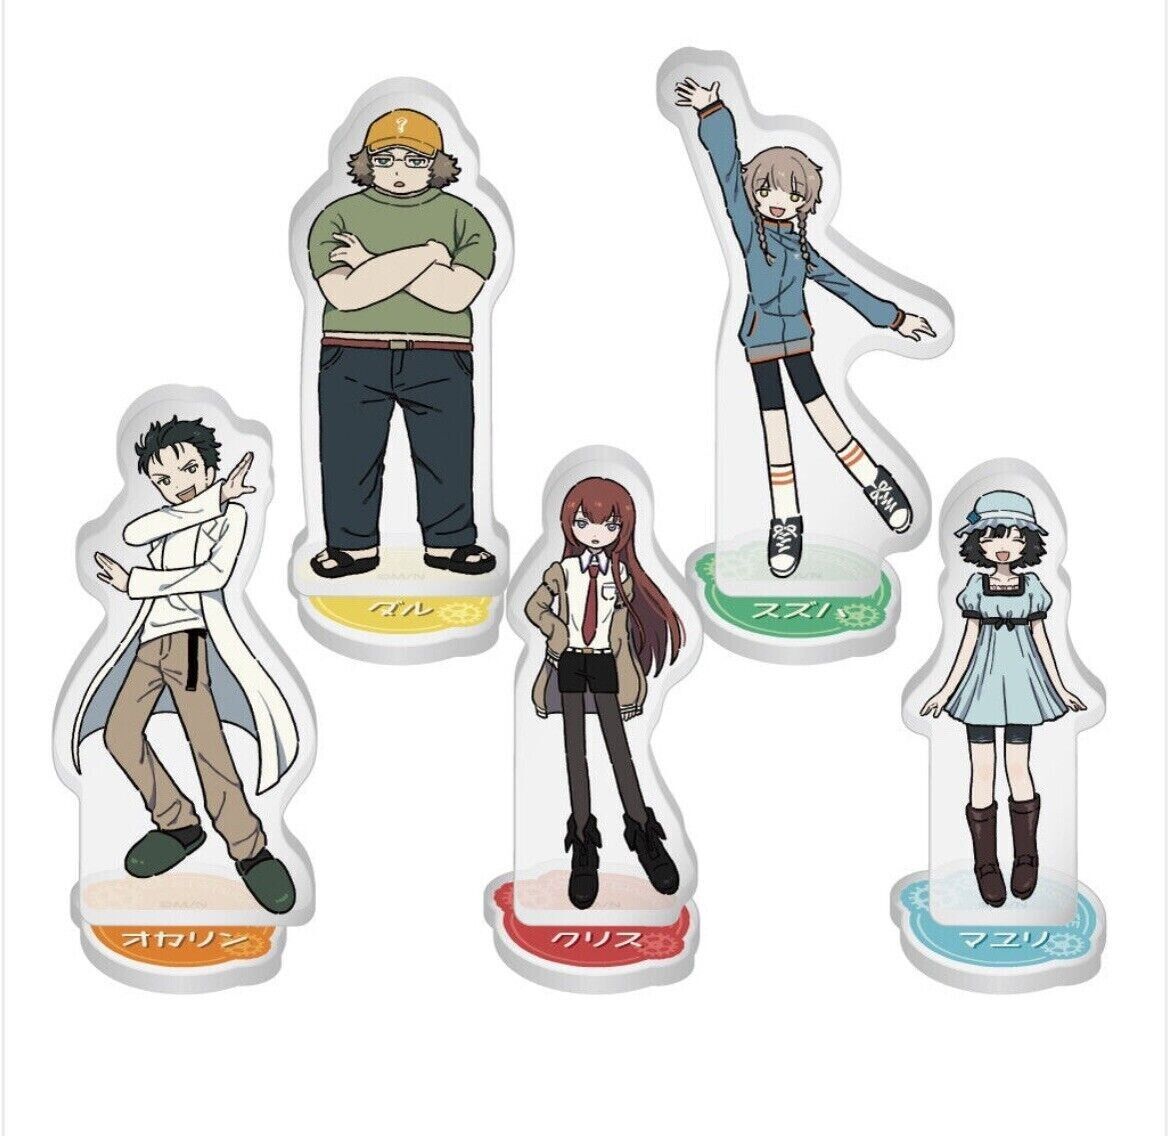 STEINS;GATE 15th Anniversary X Pop Up Shop Acrylic Stand Figure Complete Set New